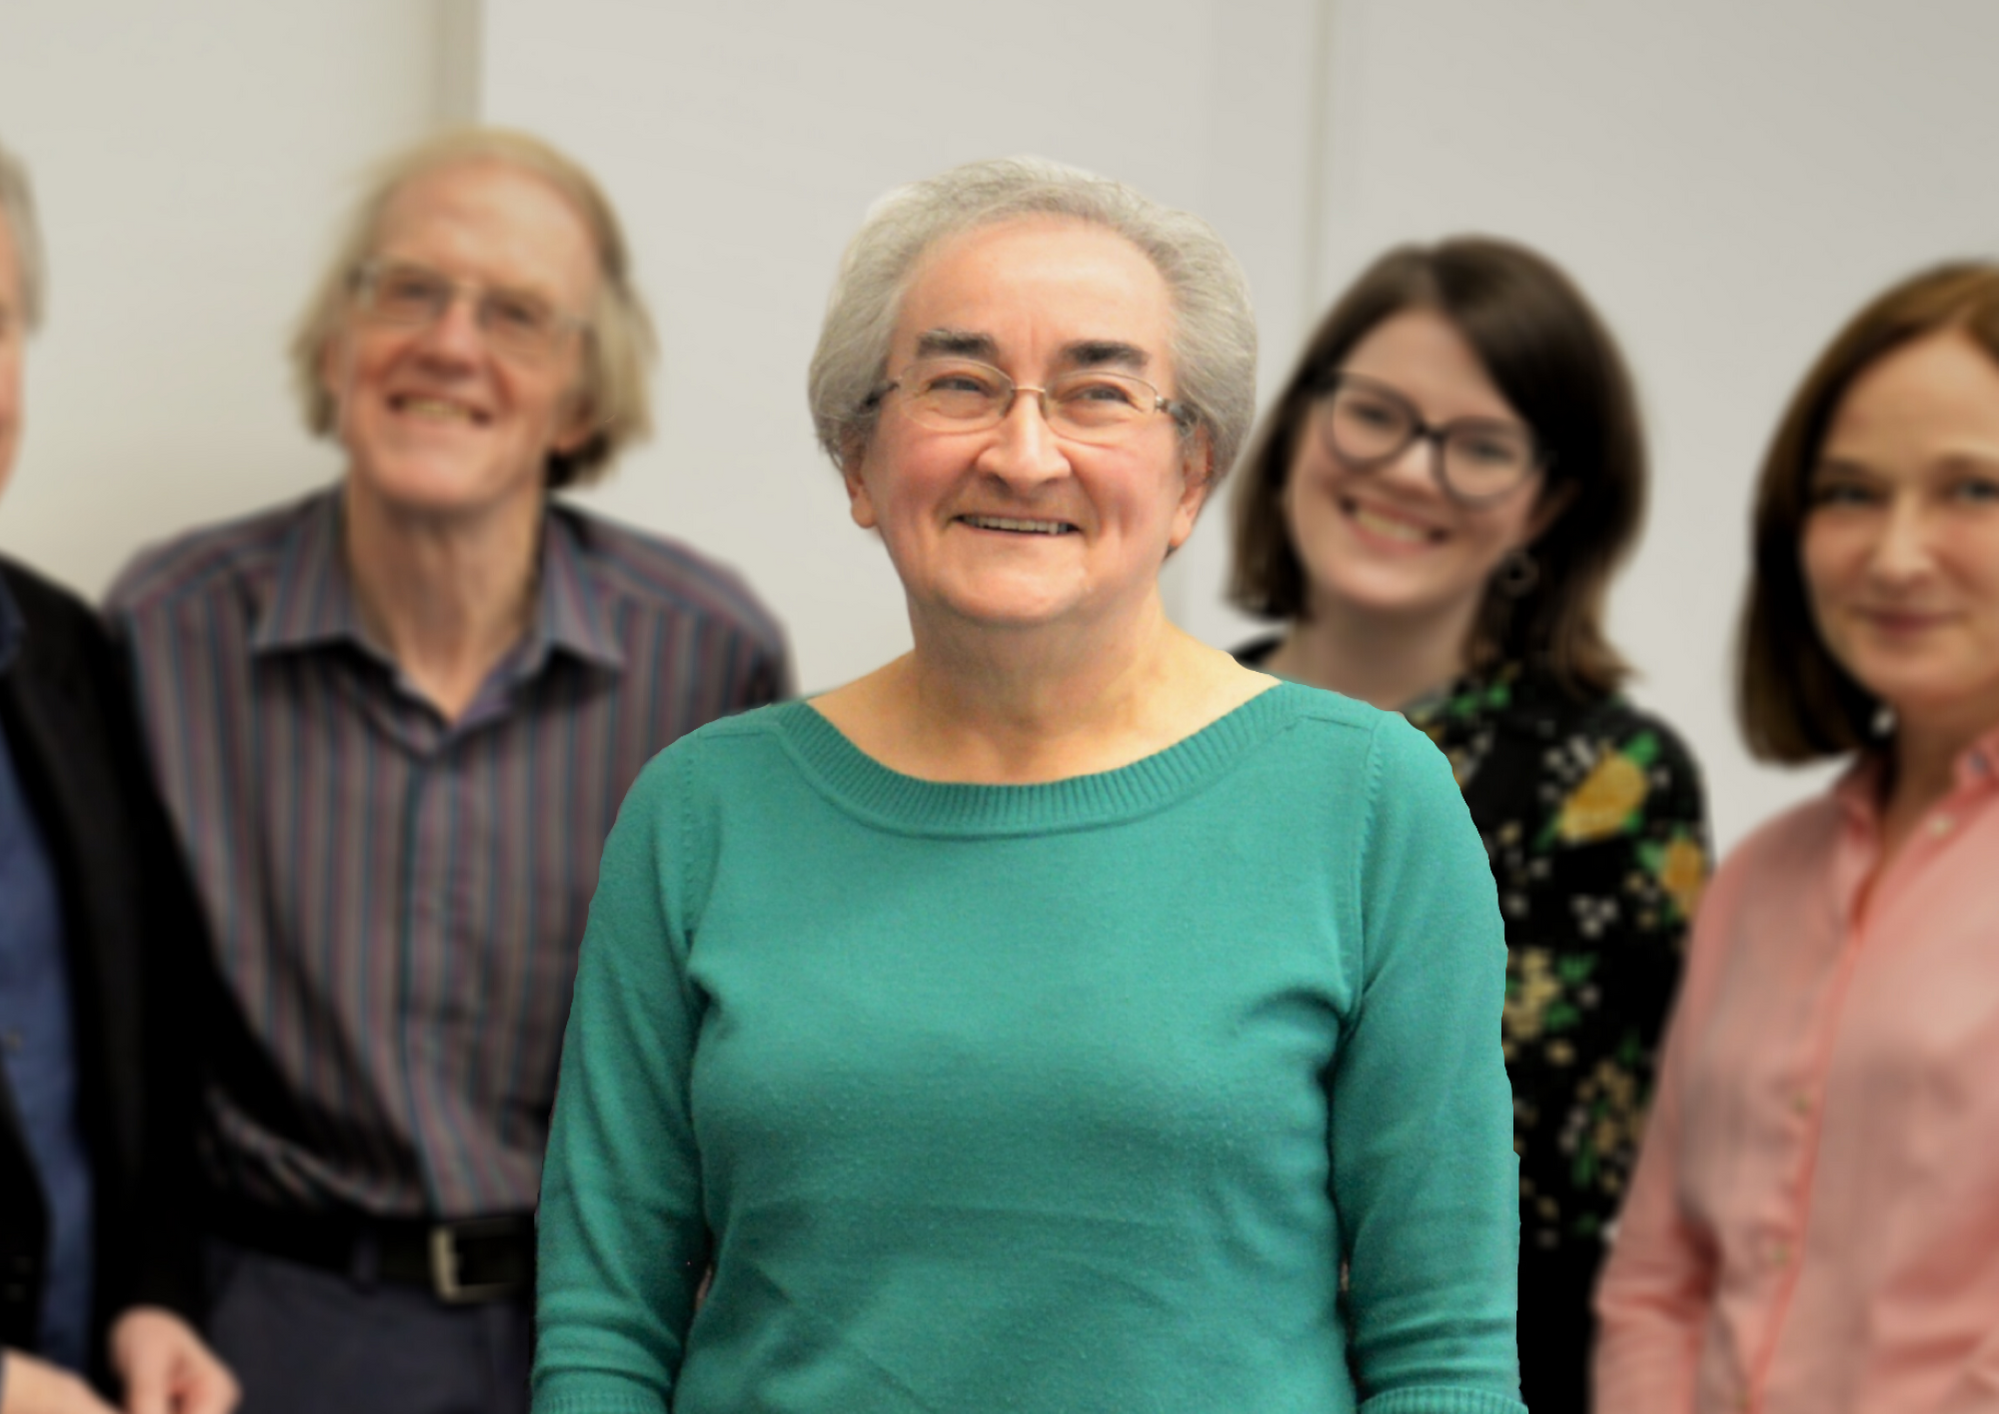 Image of Rosemary who is wearing glasses and a green jumper. In the background is three people who are slightly blurred to focus on Rosemary